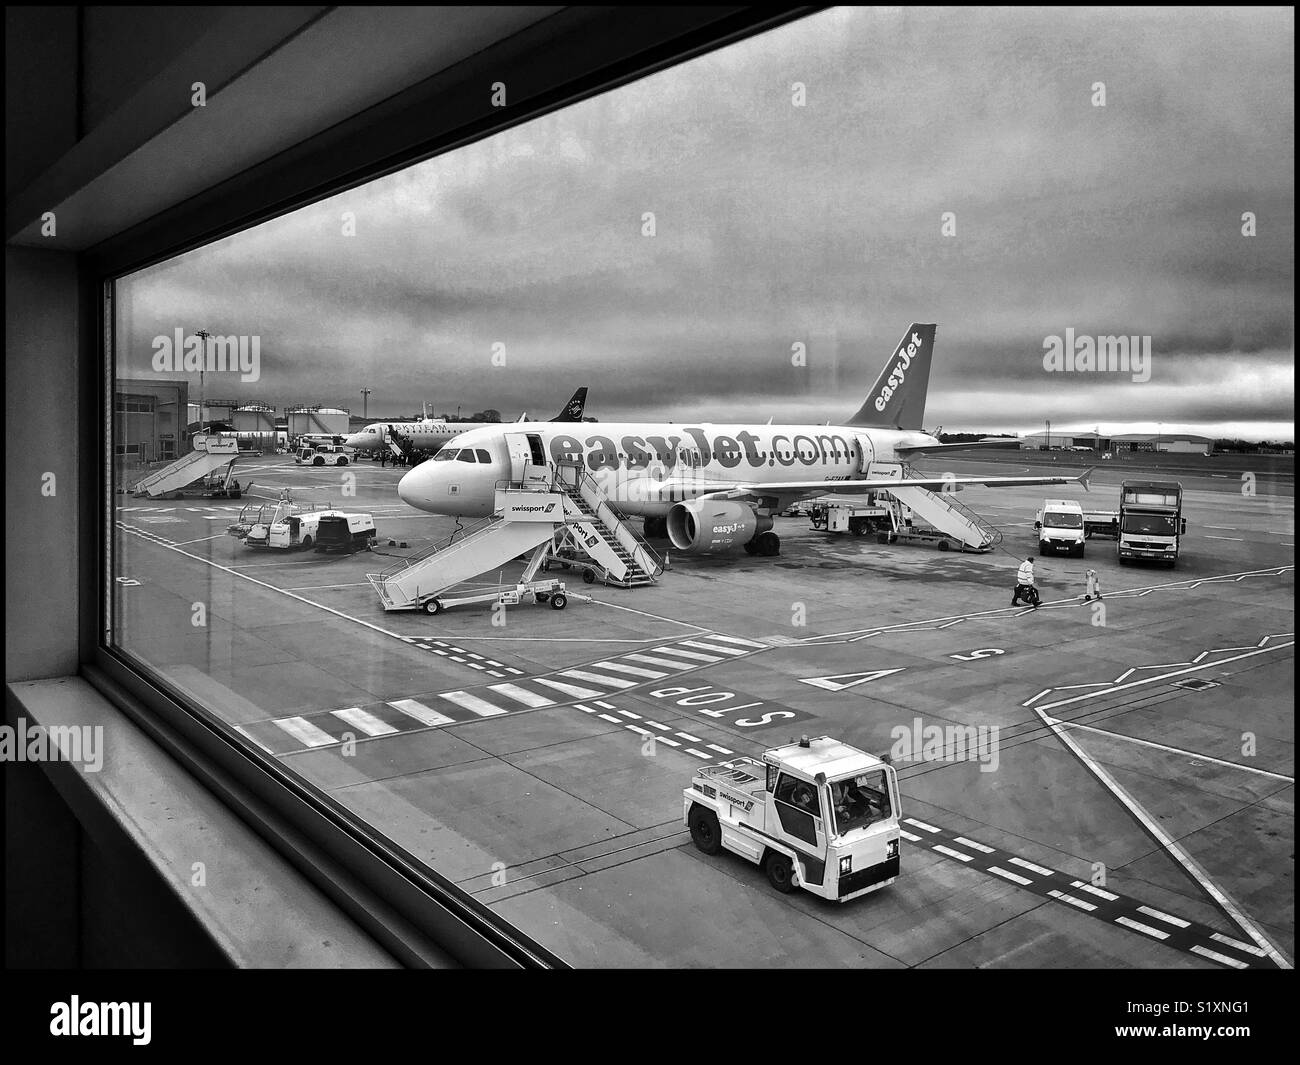 View out of a window at Bristol Airport (BRS) in England. The scene features the airside area with an EasyJet Airbus aircraft being prepared for departure. Photo Credit - © COLIN HOSKINS. Stock Photo